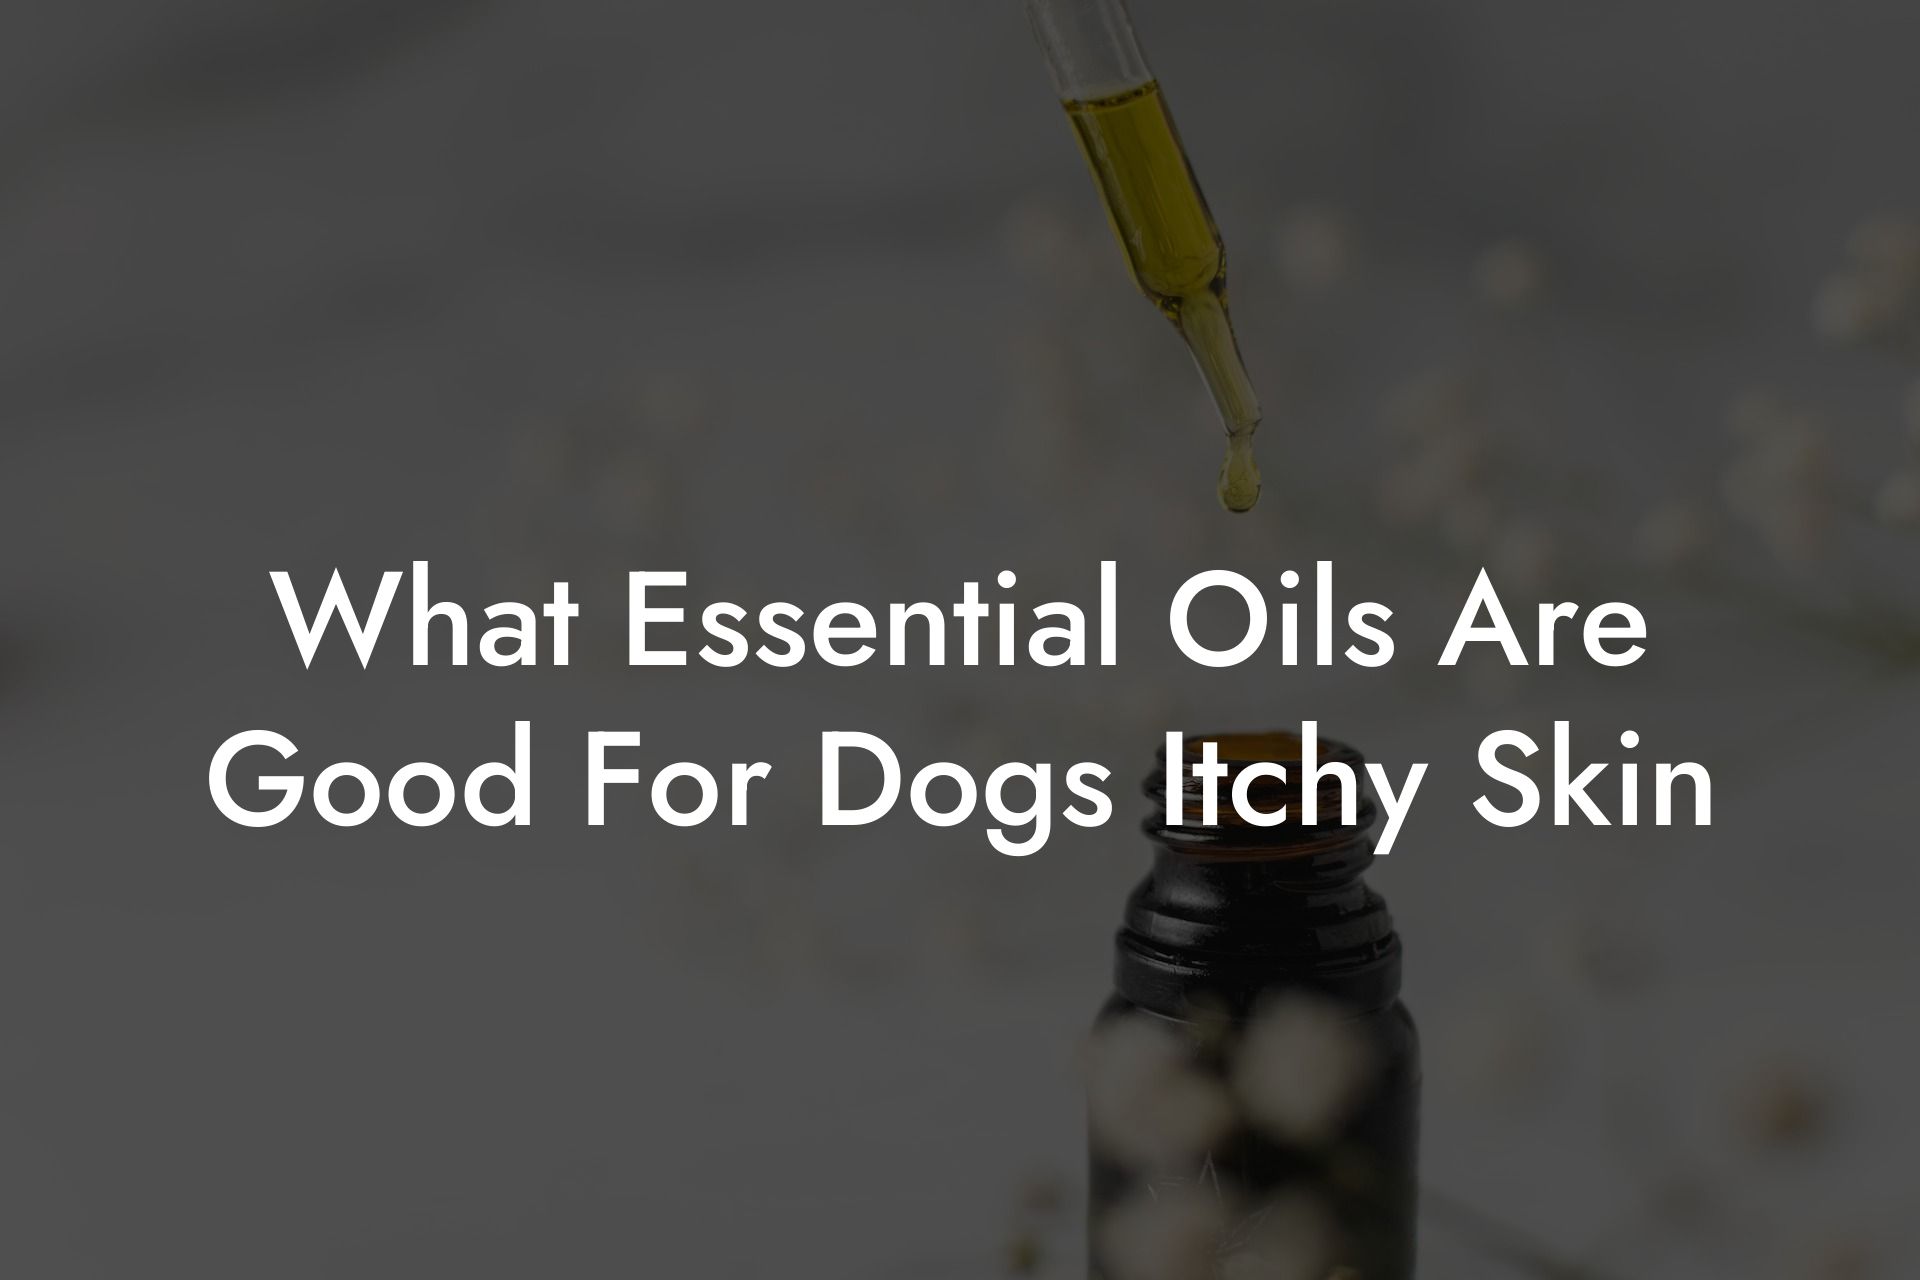 What Essential Oils Are Good For Dogs Itchy Skin